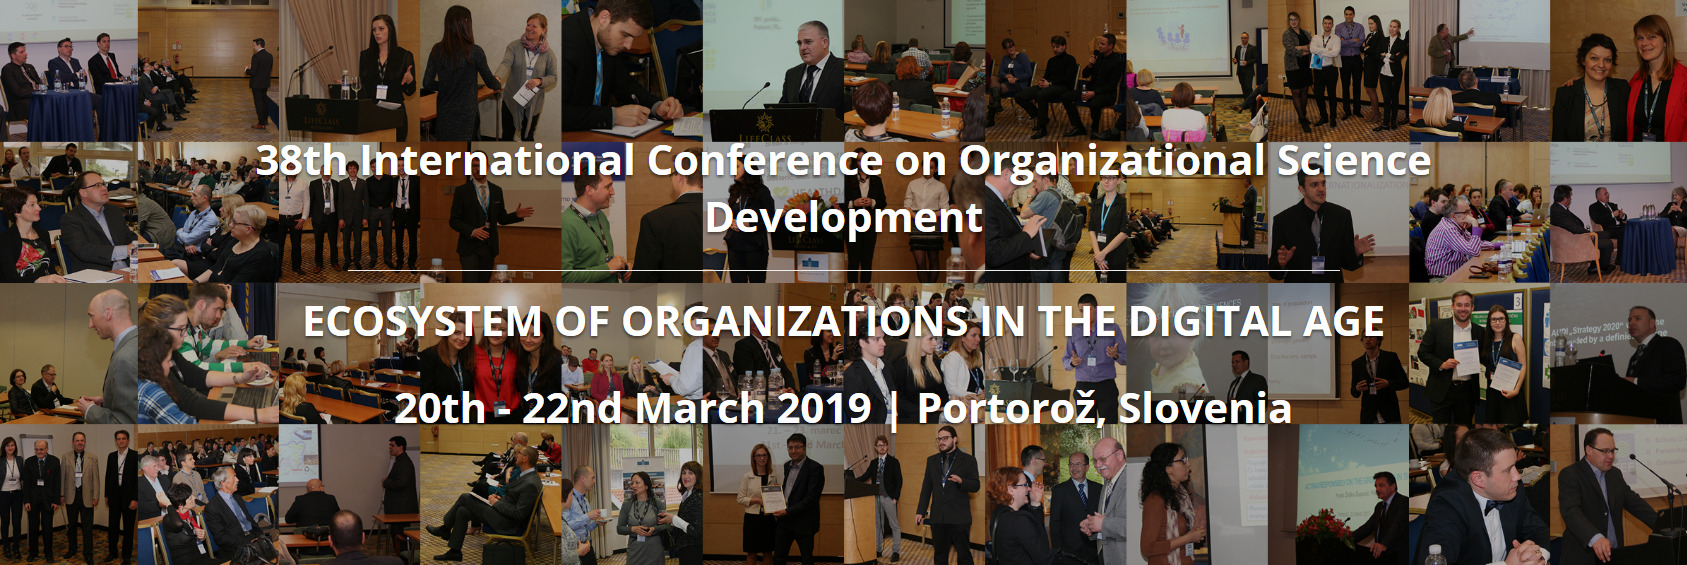 Conference Web Page